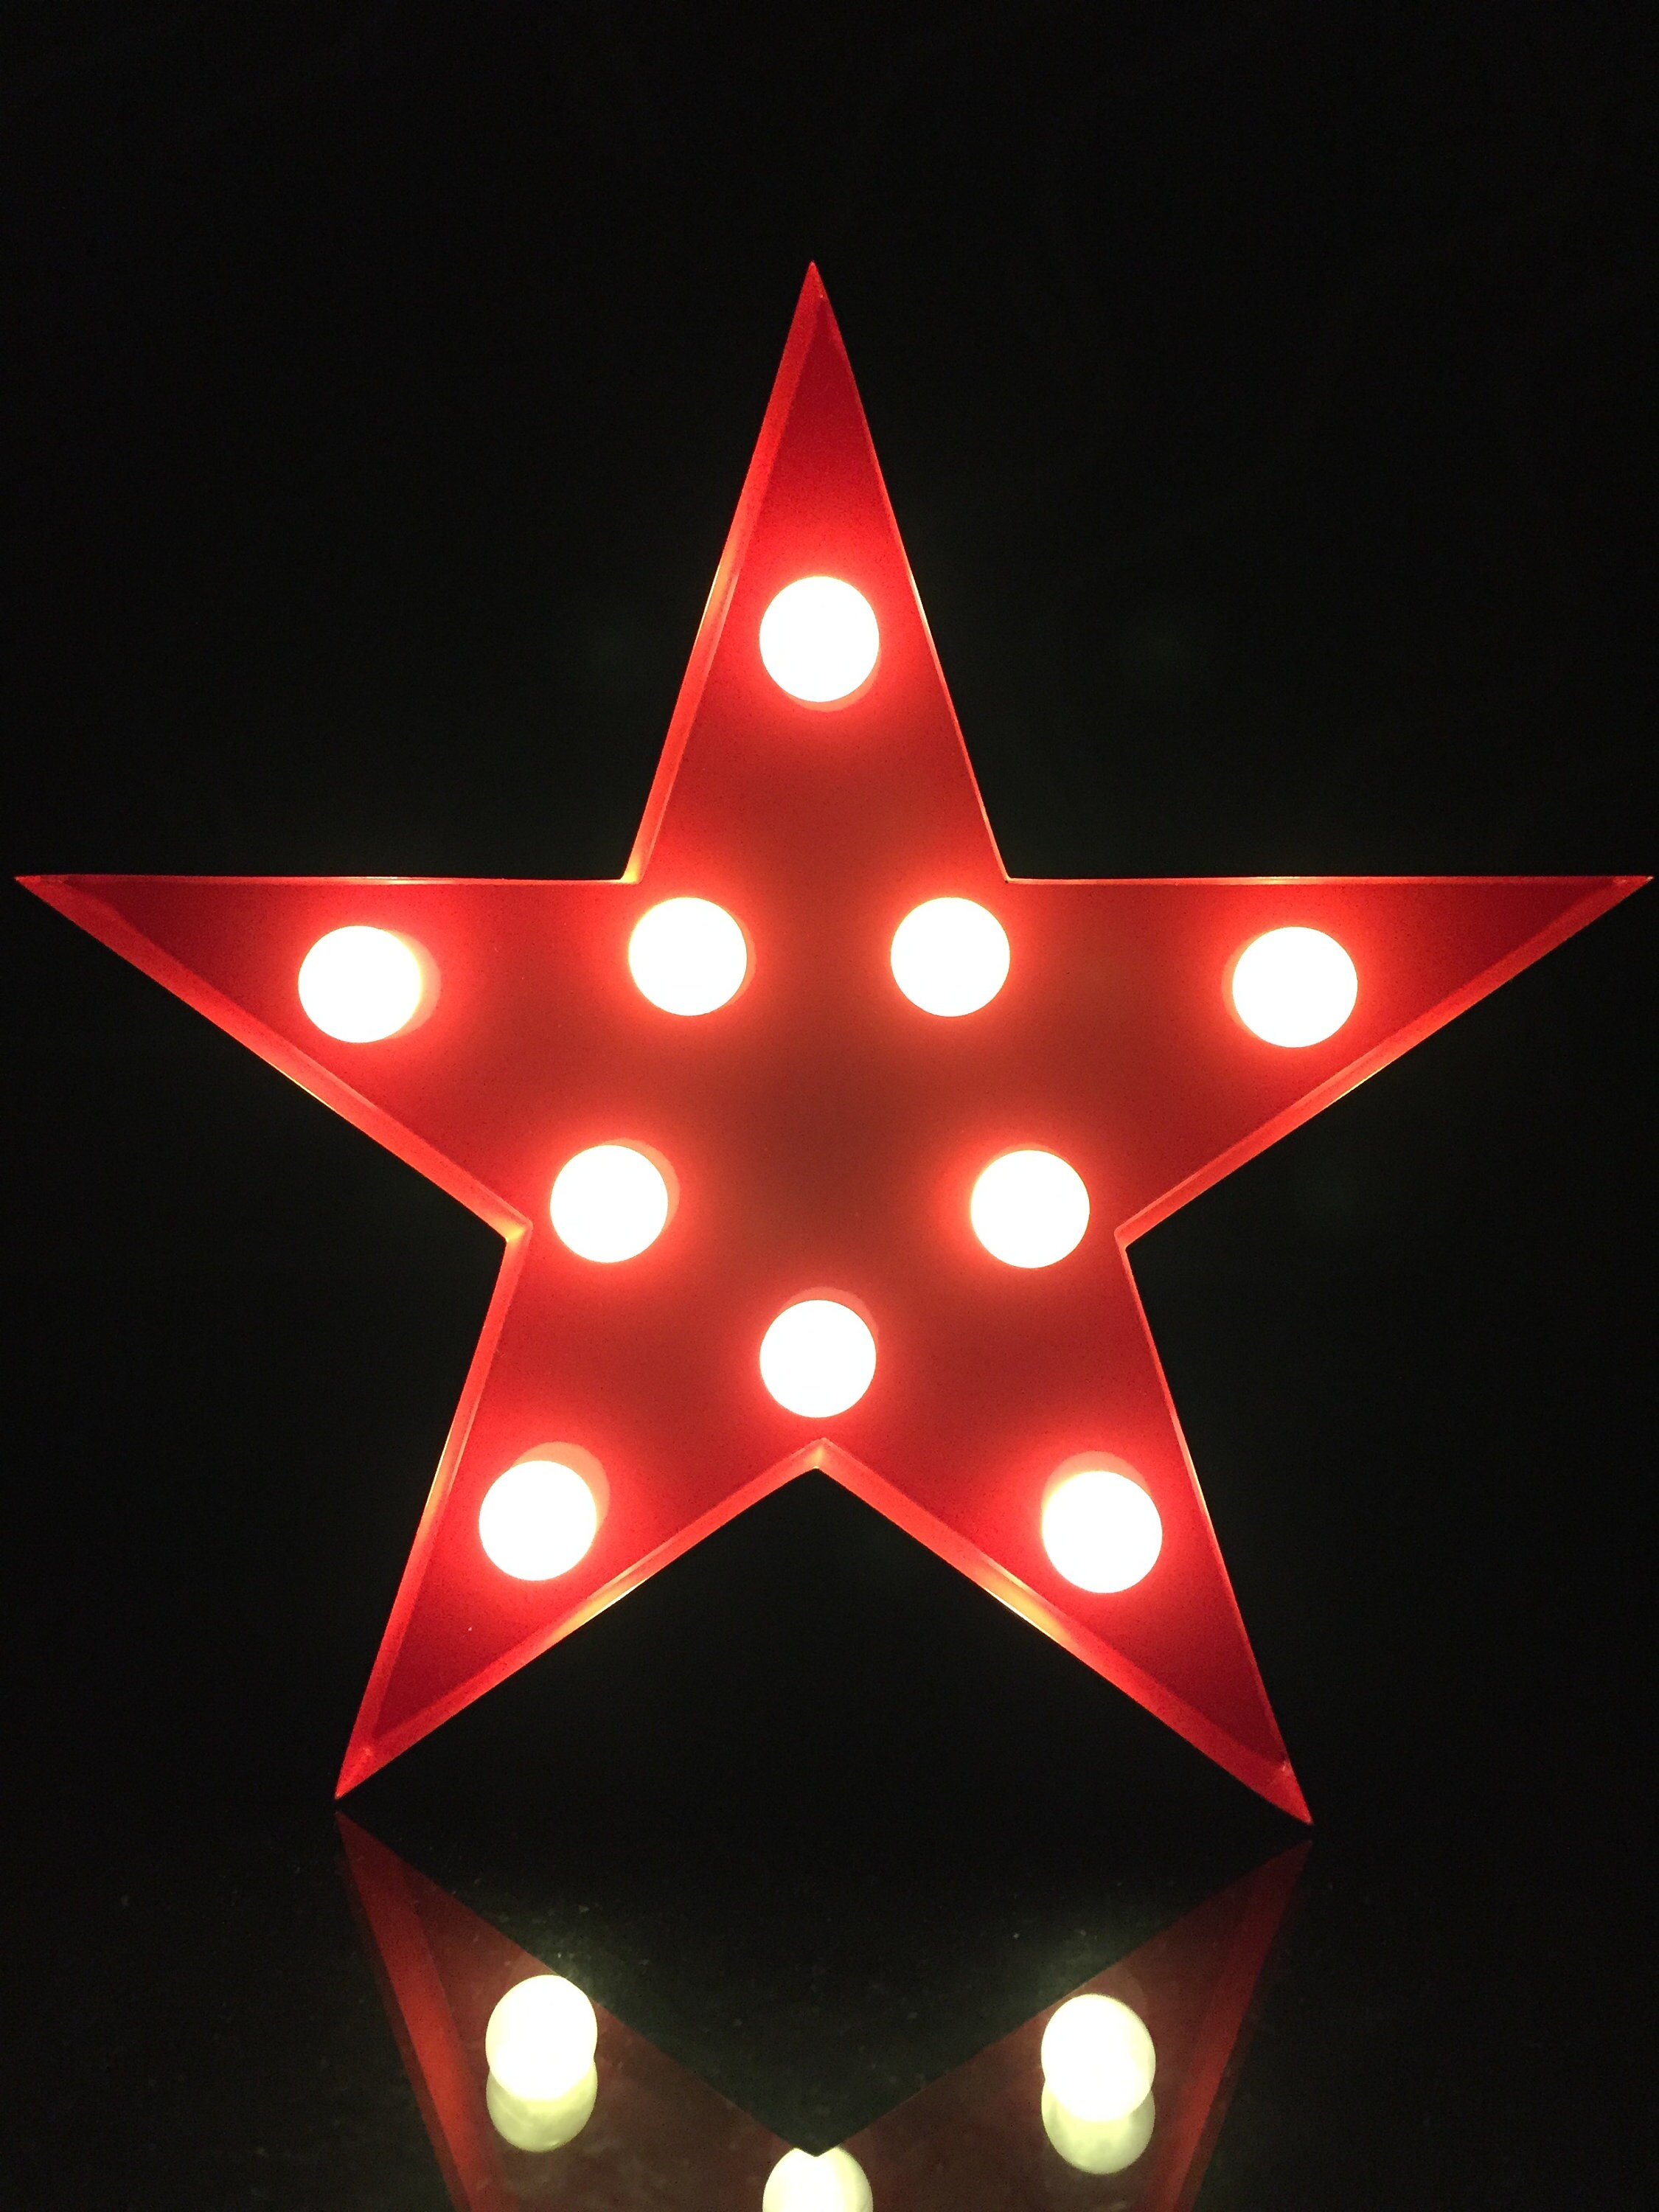 Sign LED Room Marquee Light Battery Christmas Red Star Powered Novelty Light up - Star Marquee Etsy Decor Light Night Gift Vintage